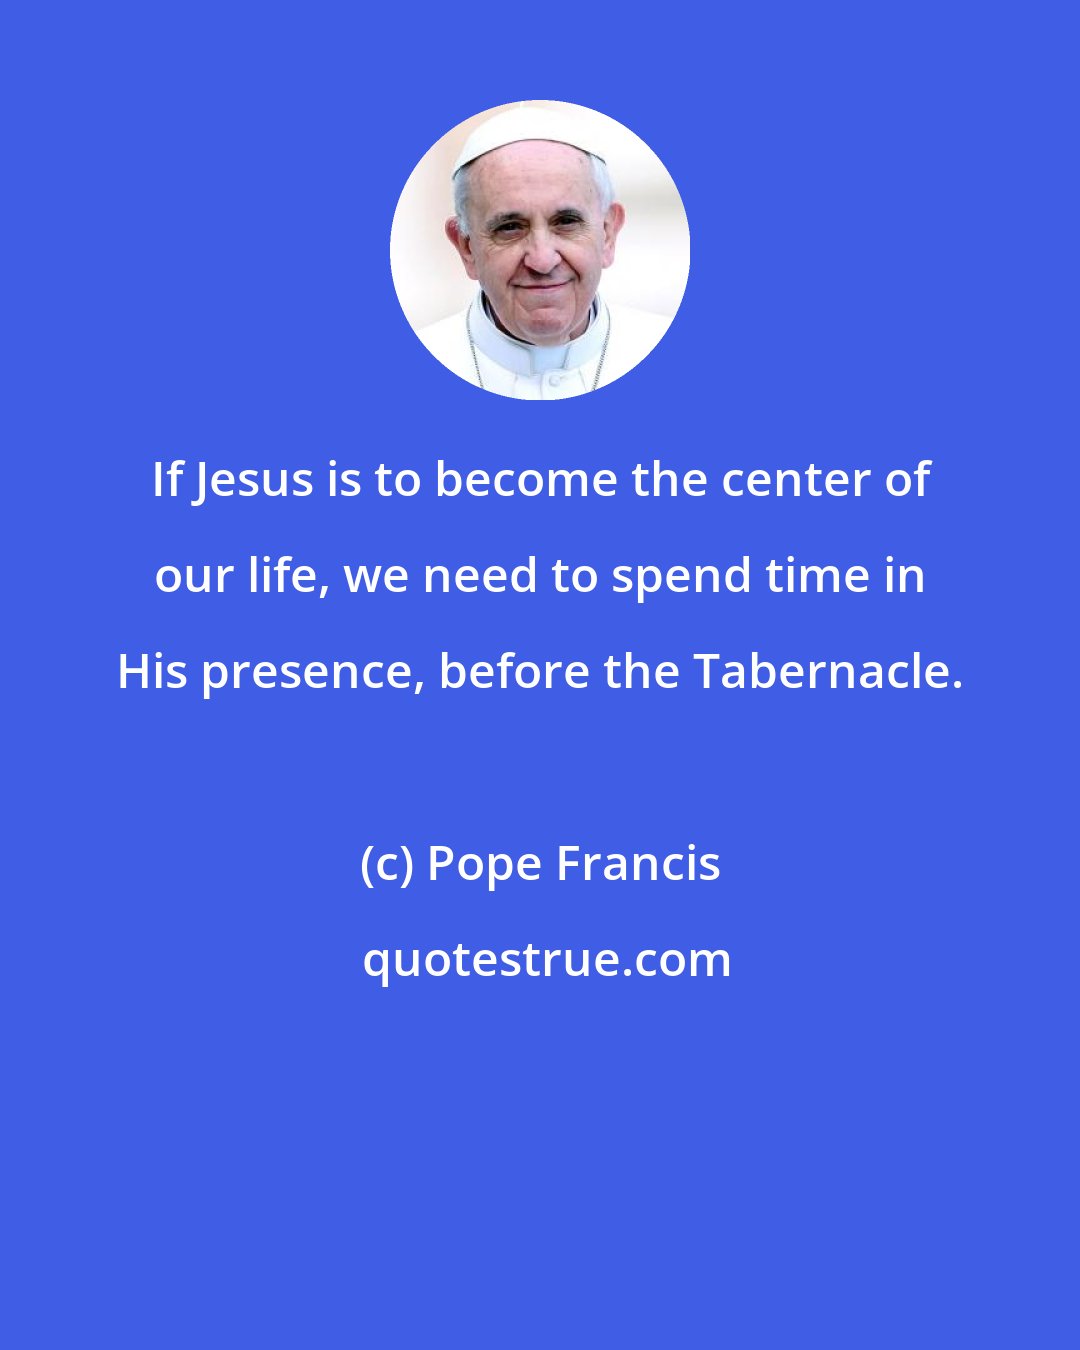 Pope Francis: If Jesus is to become the center of our life, we need to spend time in His presence, before the Tabernacle.